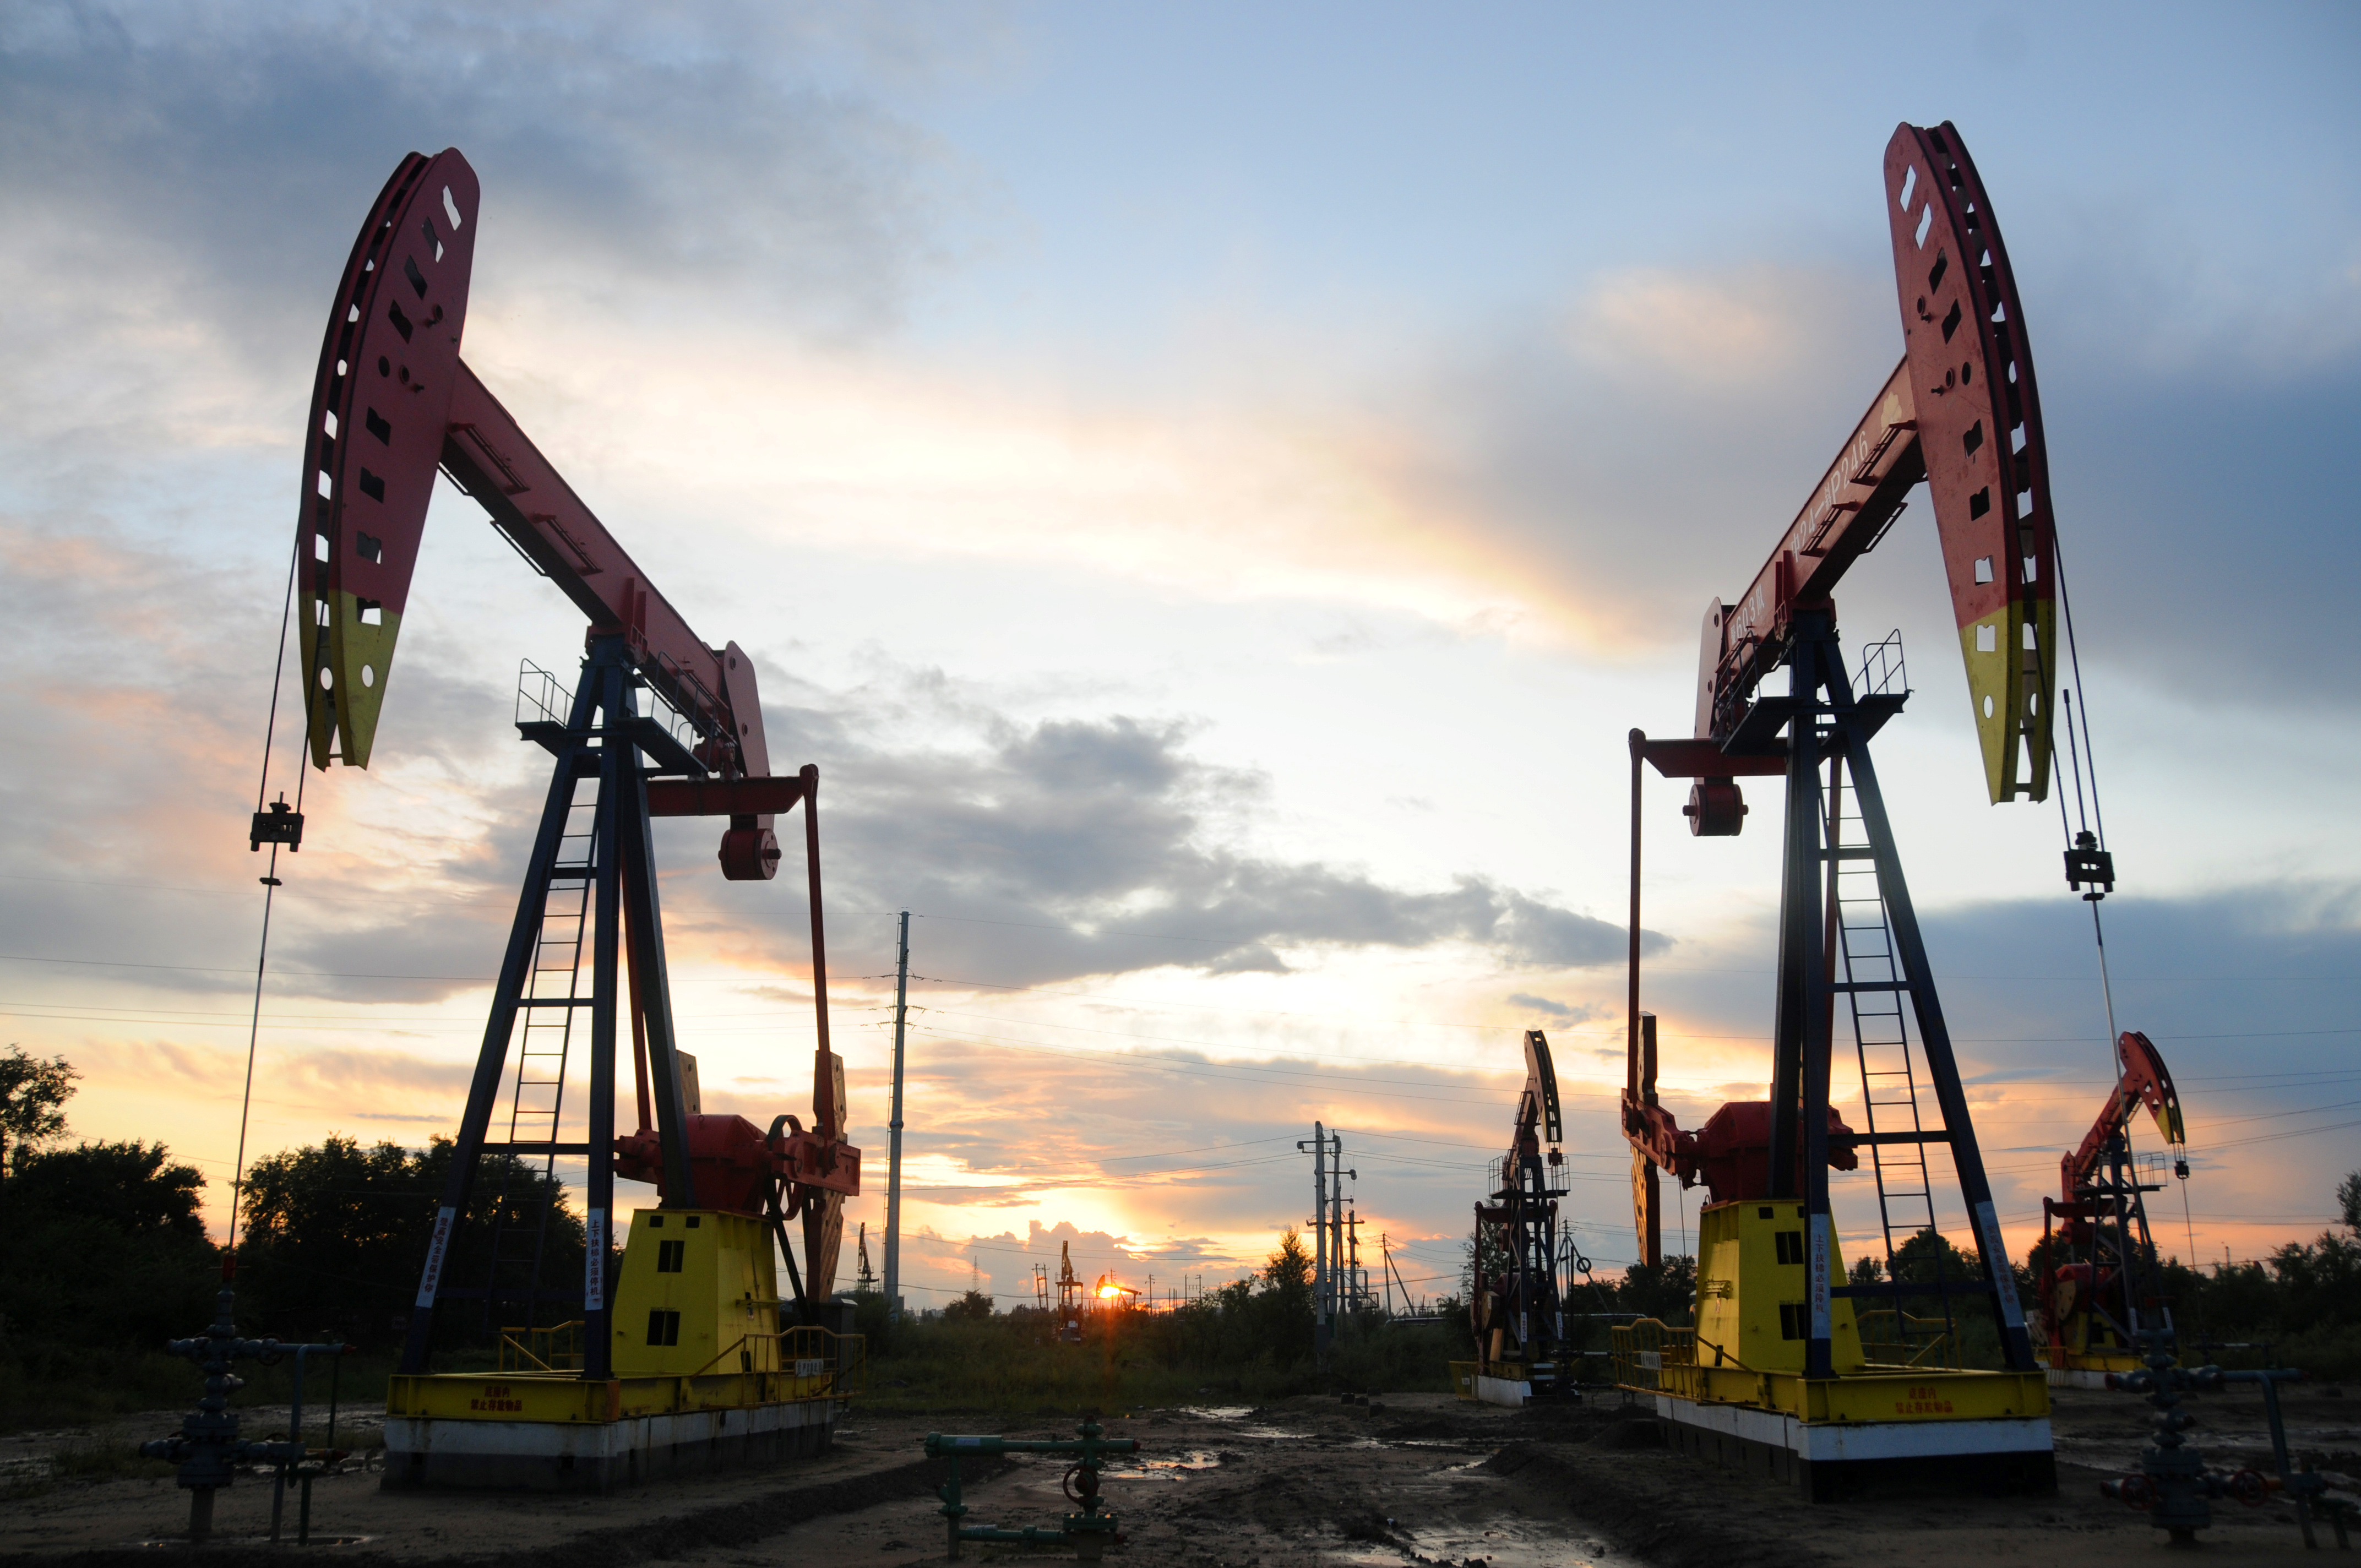 Bloomberg: Crude Oil Buckles as Recession Angst Rattles Commodity Investors